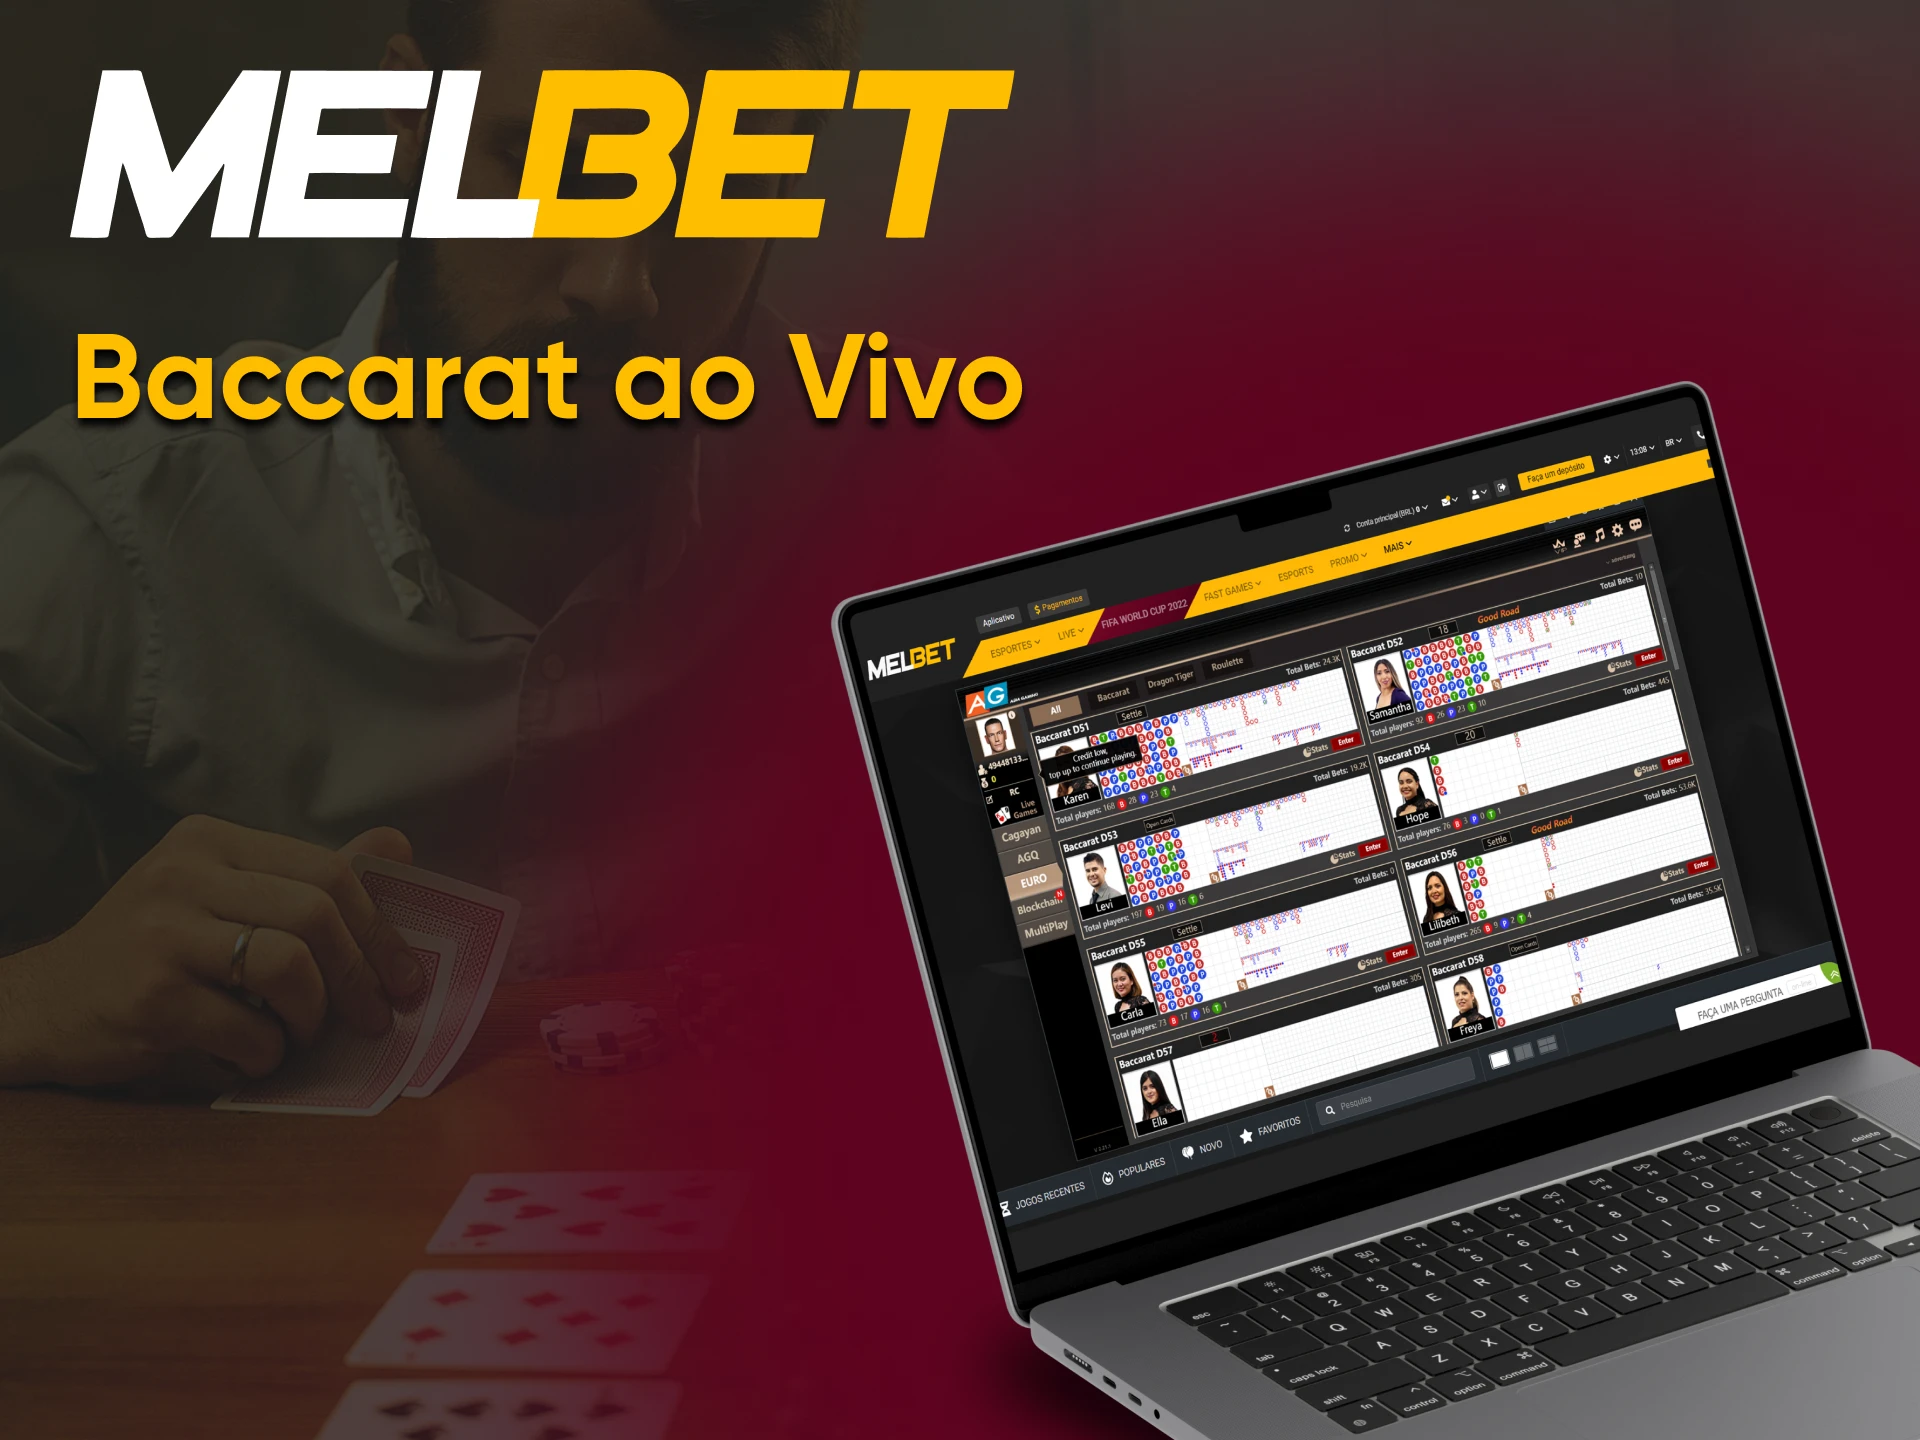 To play Melbet Live Baccarat, go to the desired section.